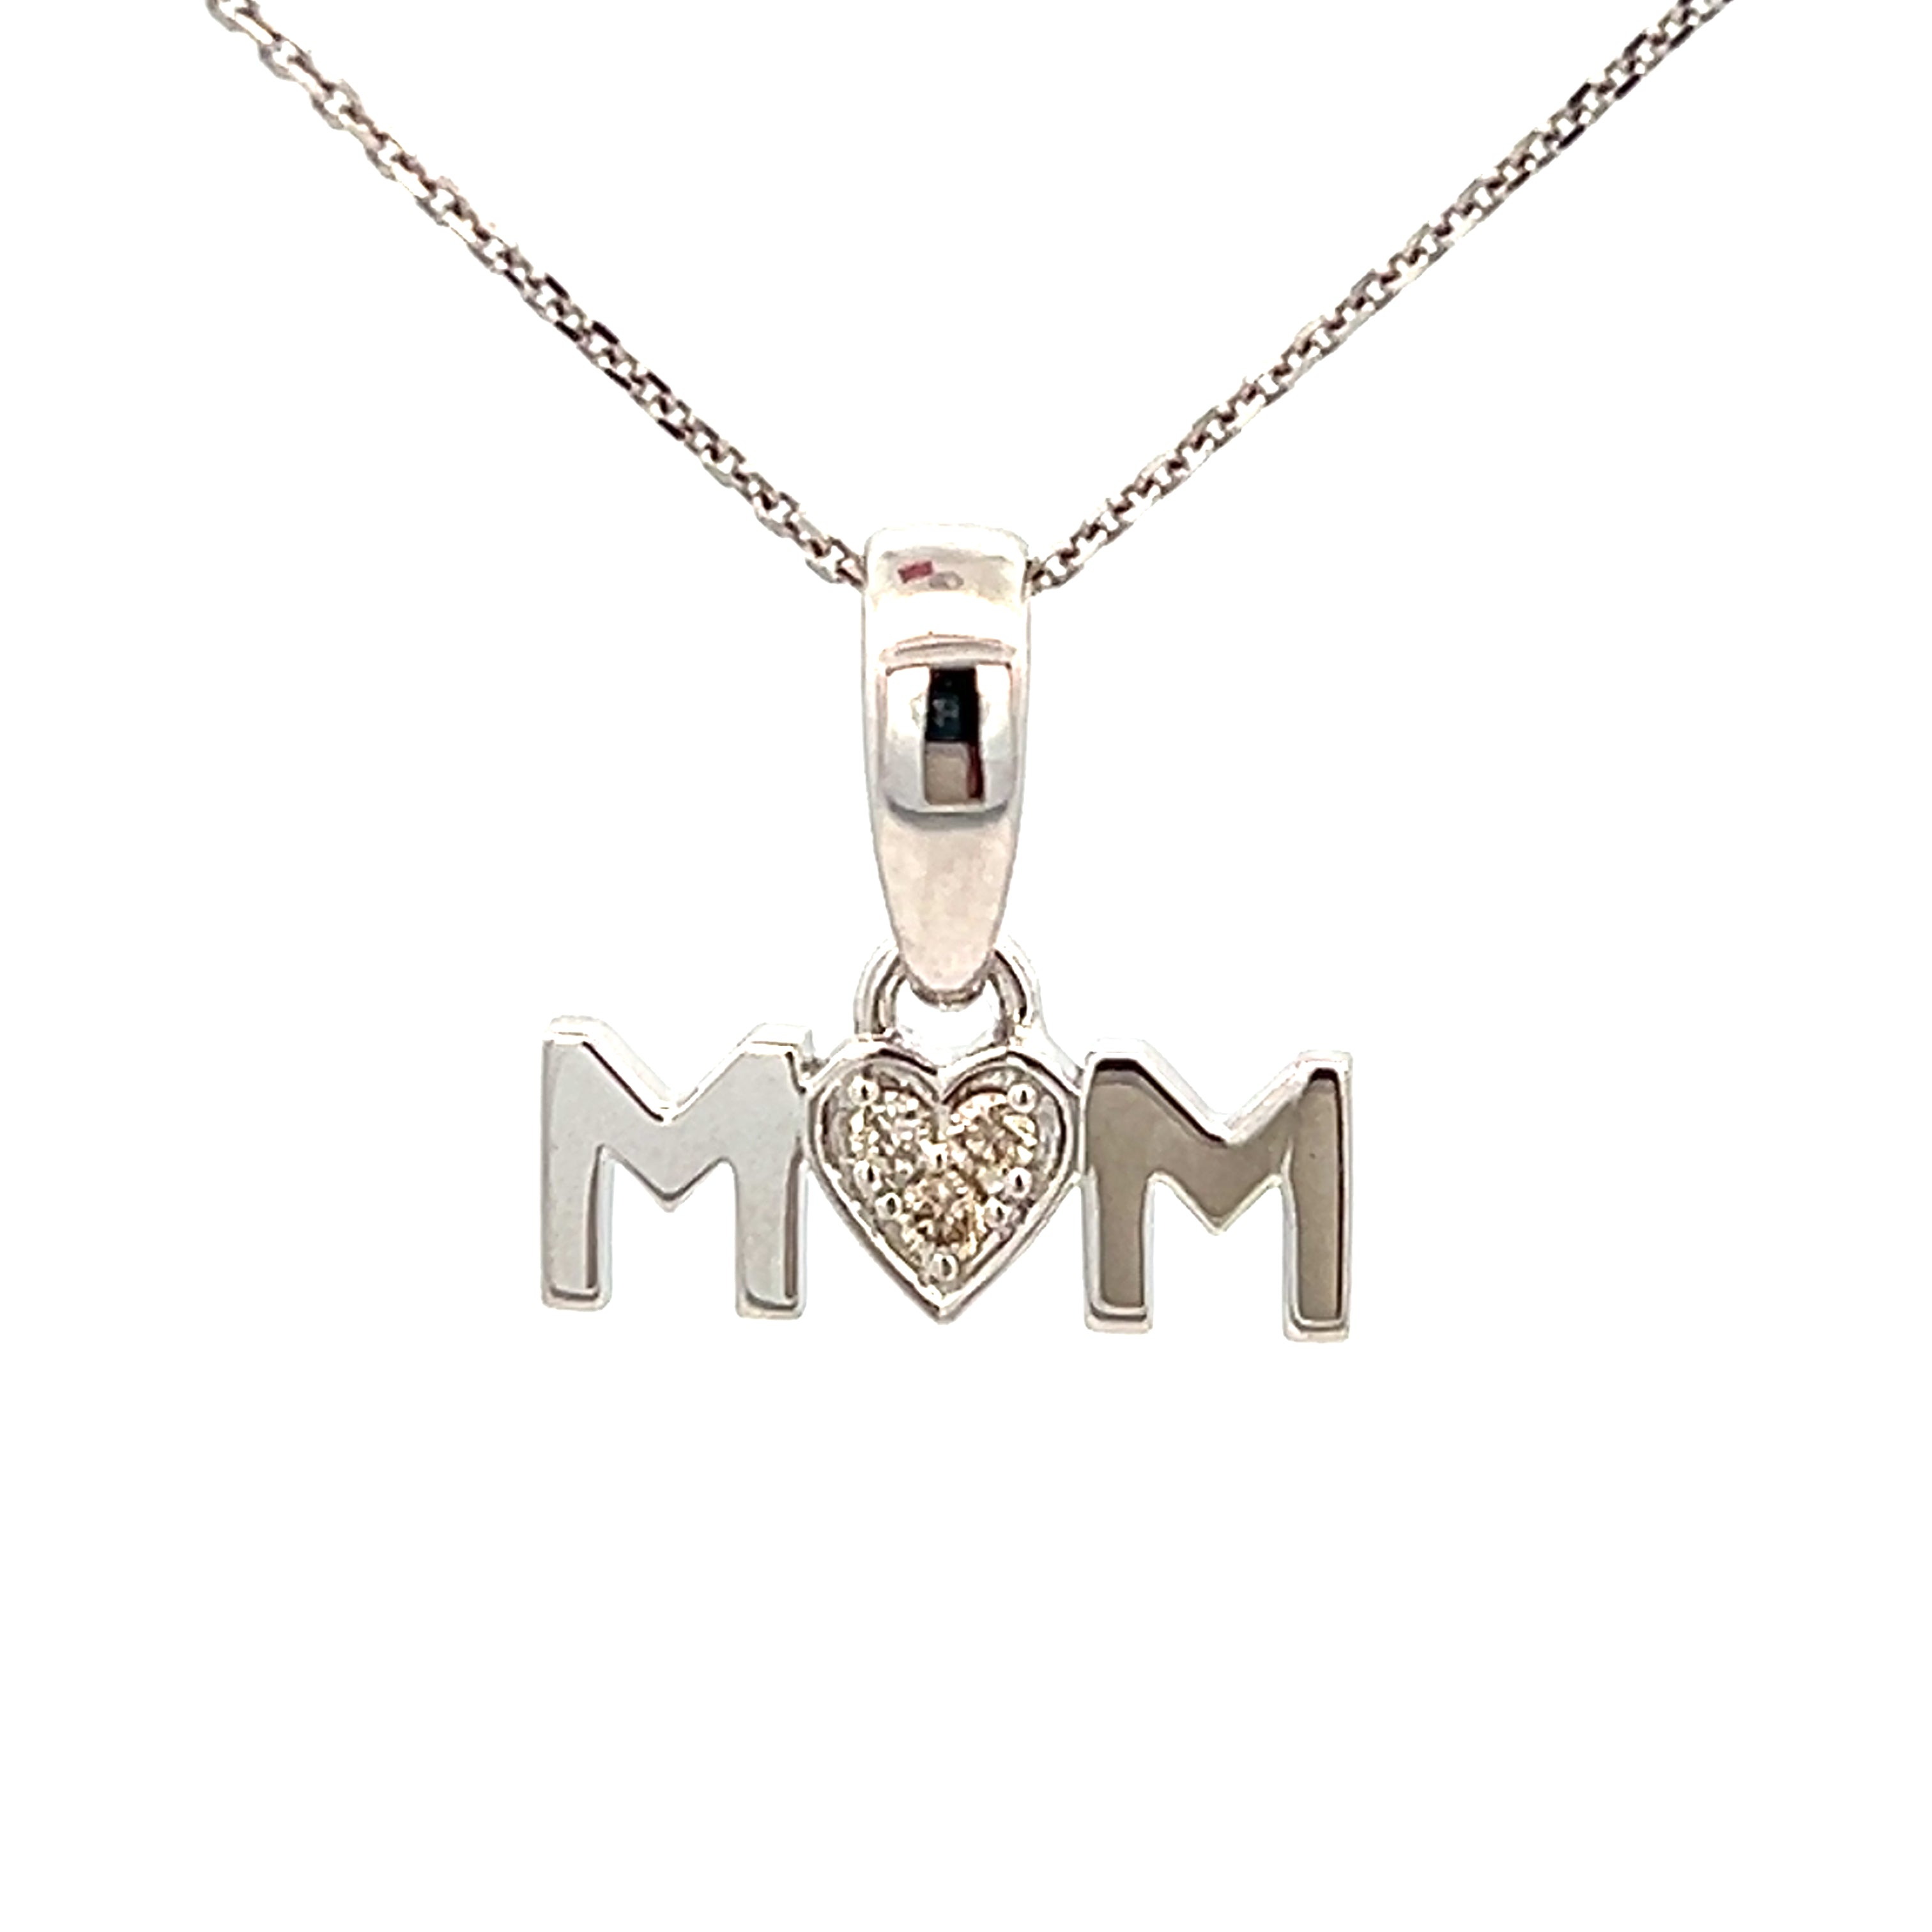 My mom is getting me this for Christmas. She let me choose it since I am  picky with jewelry. Is 1/2 ct enough for a necklace? : r/Diamonds